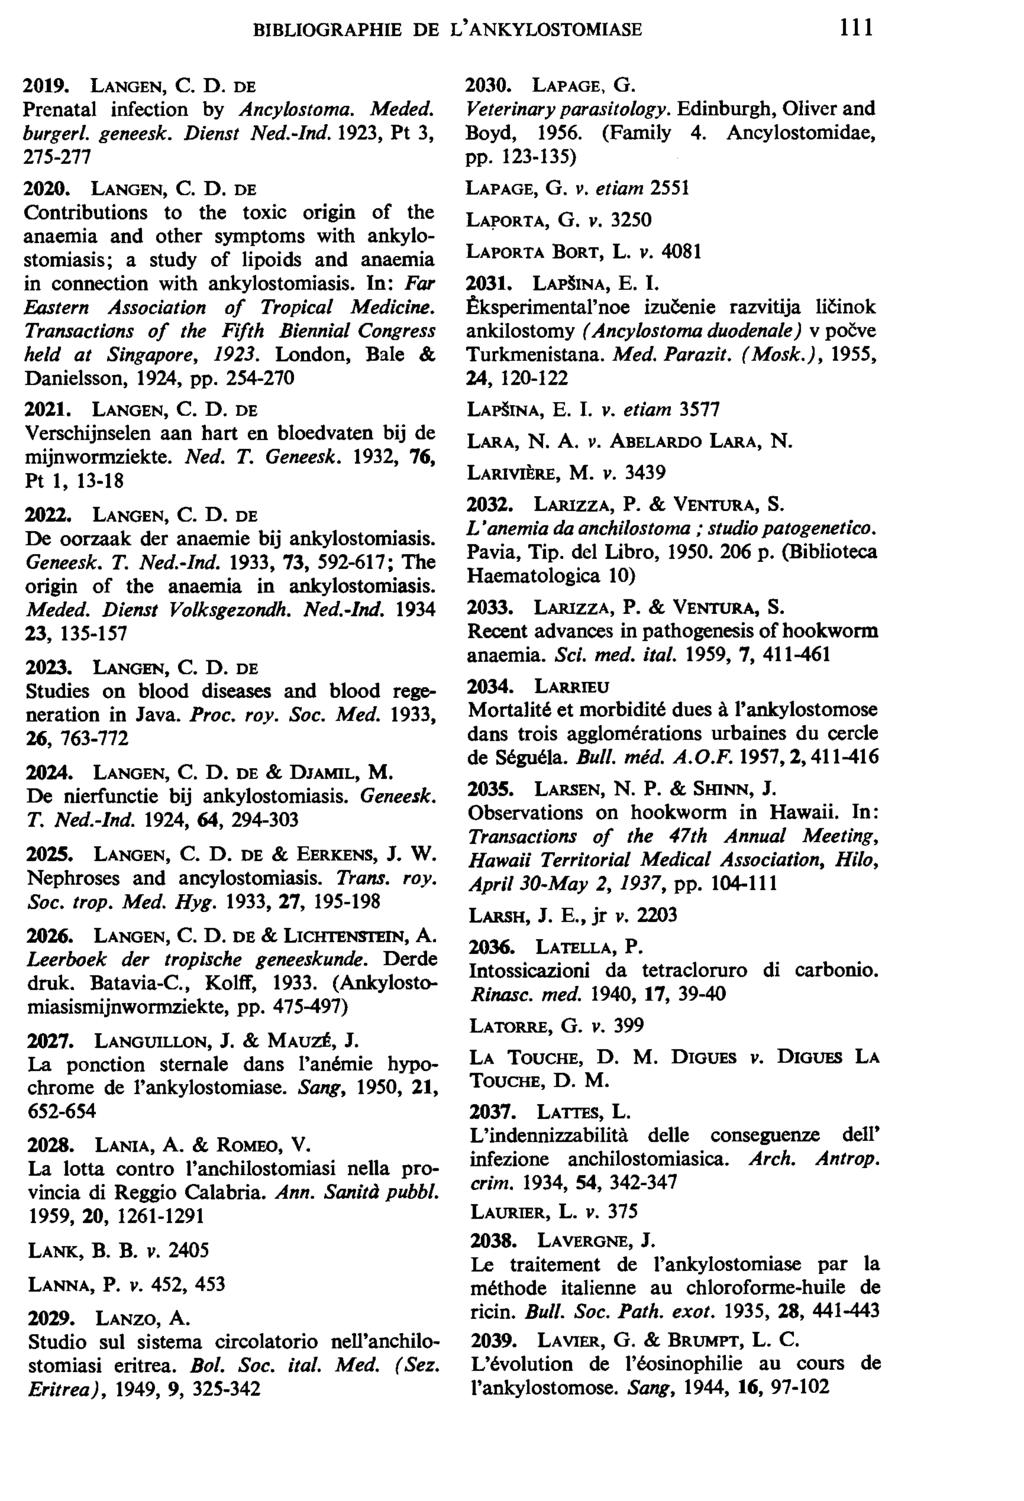 BIBLIOGRAPHIE DE L' ANKYLOSTOMIASE 111 2019. LANGEN, C. D. DE Prenatal infection by Ancylostoma. Meded. burger/. geneesk. Dienst Ned.-Ind. 1923, Pt 3, 275-277 2020. LANGEN, C. D. DE Contributions to the toxic or1gm of the anaemia and other symptoms with ankylostomiasis; a study of Jipoids and anaemia in connection with ankylostomiasis.